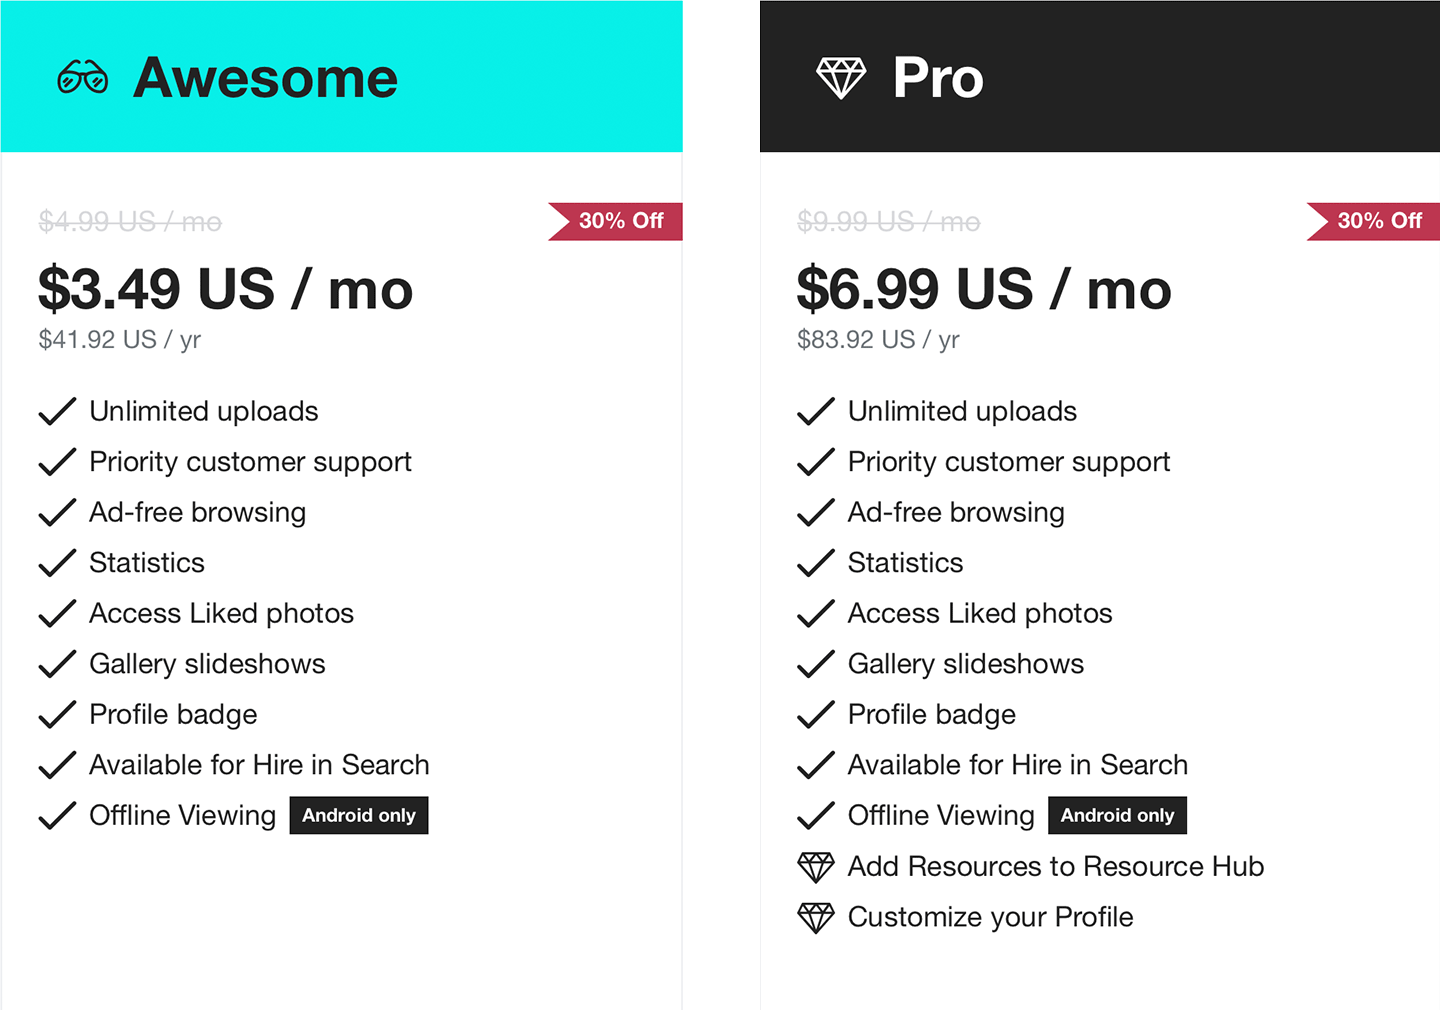 Overview of 500px's Awesome vs Pro membership offerings